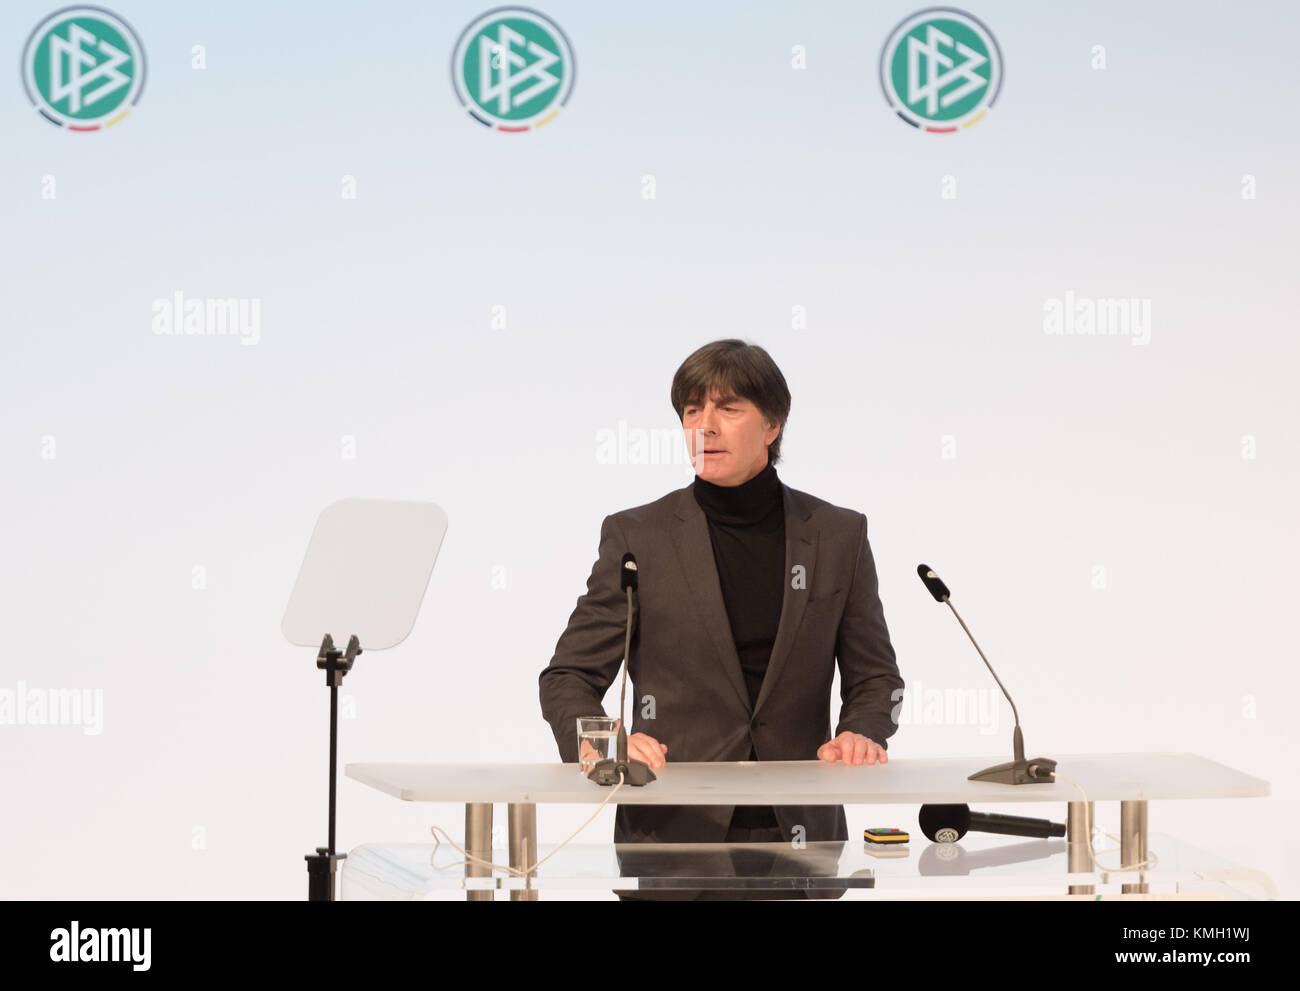 Frankfurt, Germany. 8th December, 2017. Extraordinay DFB Bundestag, Congress Center  . In the Picture: German National Team Head Coach Joachim Loew speaks to the audience. Photo by Ulrich Roth / ulrich-roth.com/Alamy Live News Stock Photo